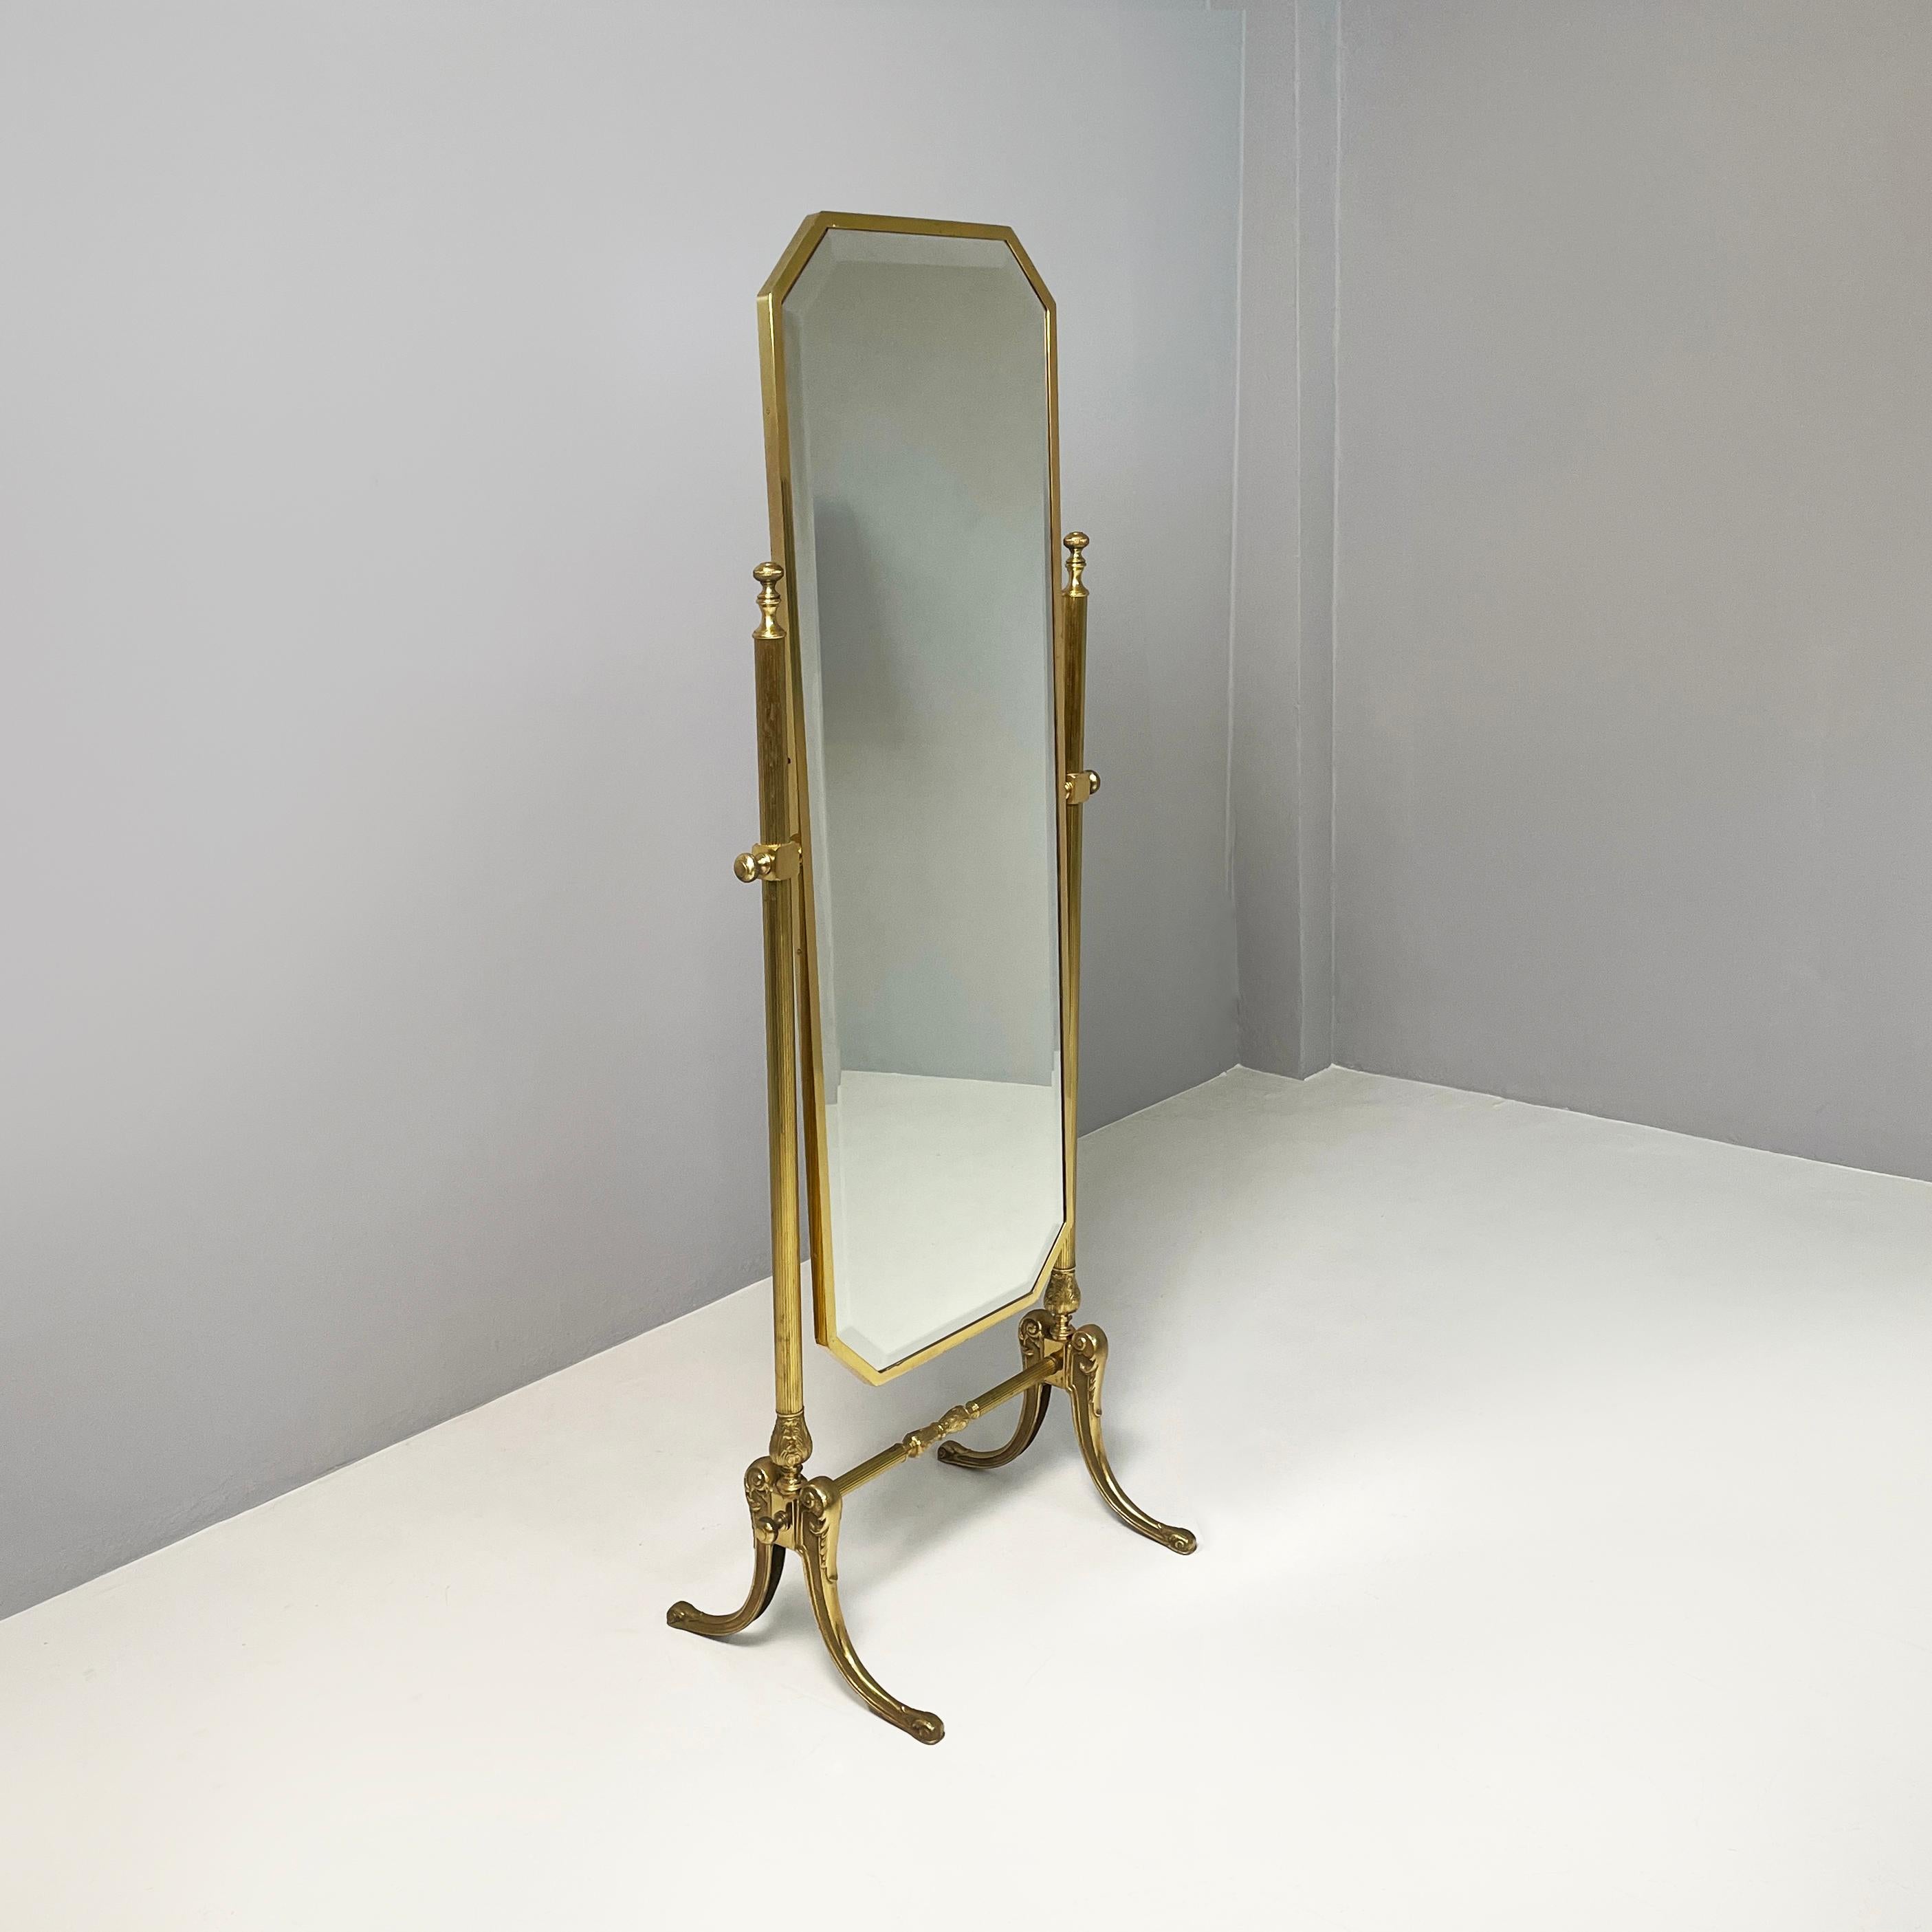 Italian art deco Full-length, self-supporting tilting floor mirror in bass, 1940s
Full-length and self-supporting floor mirror in brass. The octagonal mirror is tilting, in fact it is possible to adjust its inclination. The structure has two finely